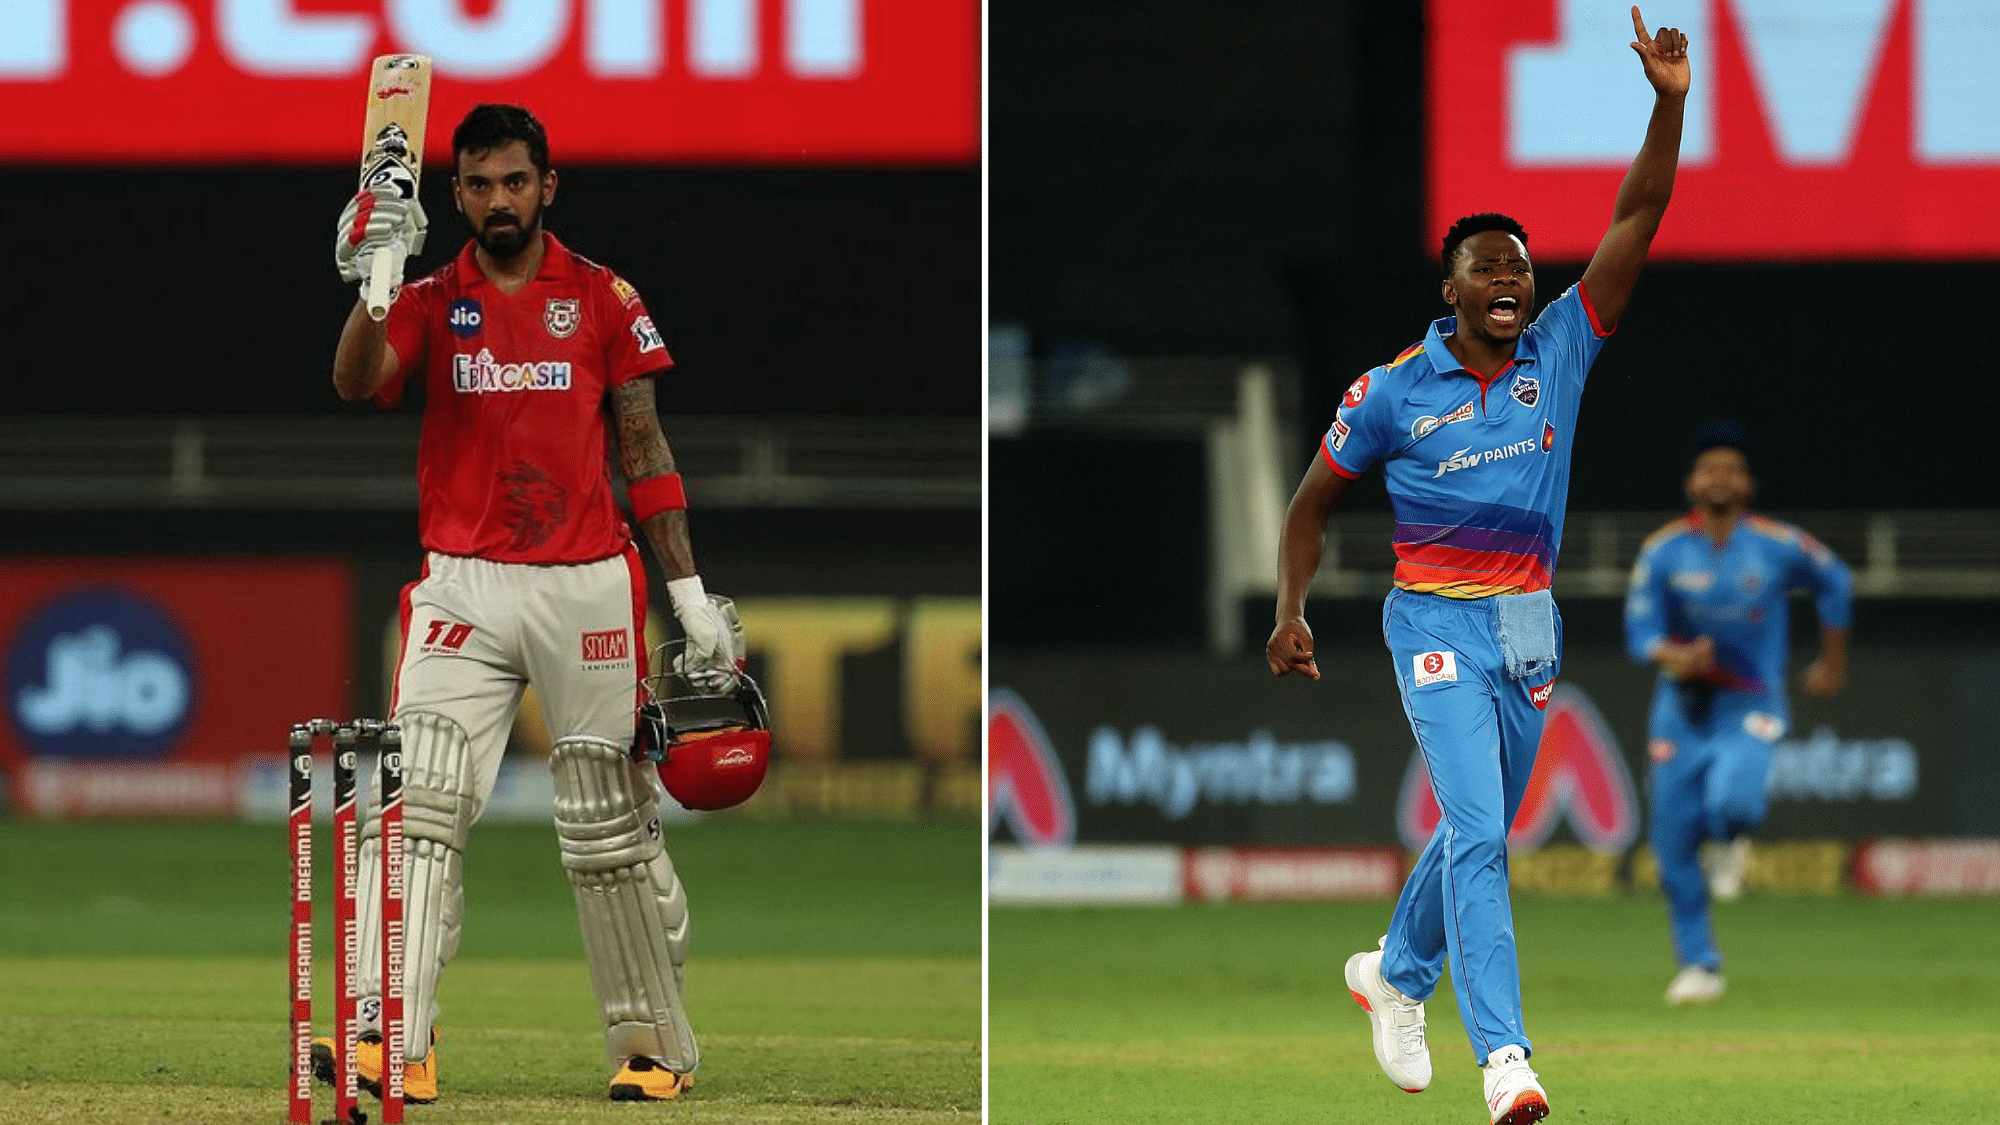 KL Rahul holds on to the Orange Cap with 387 runs, while Kagiso Rabada leads the Purple Cap race with 17 wickets